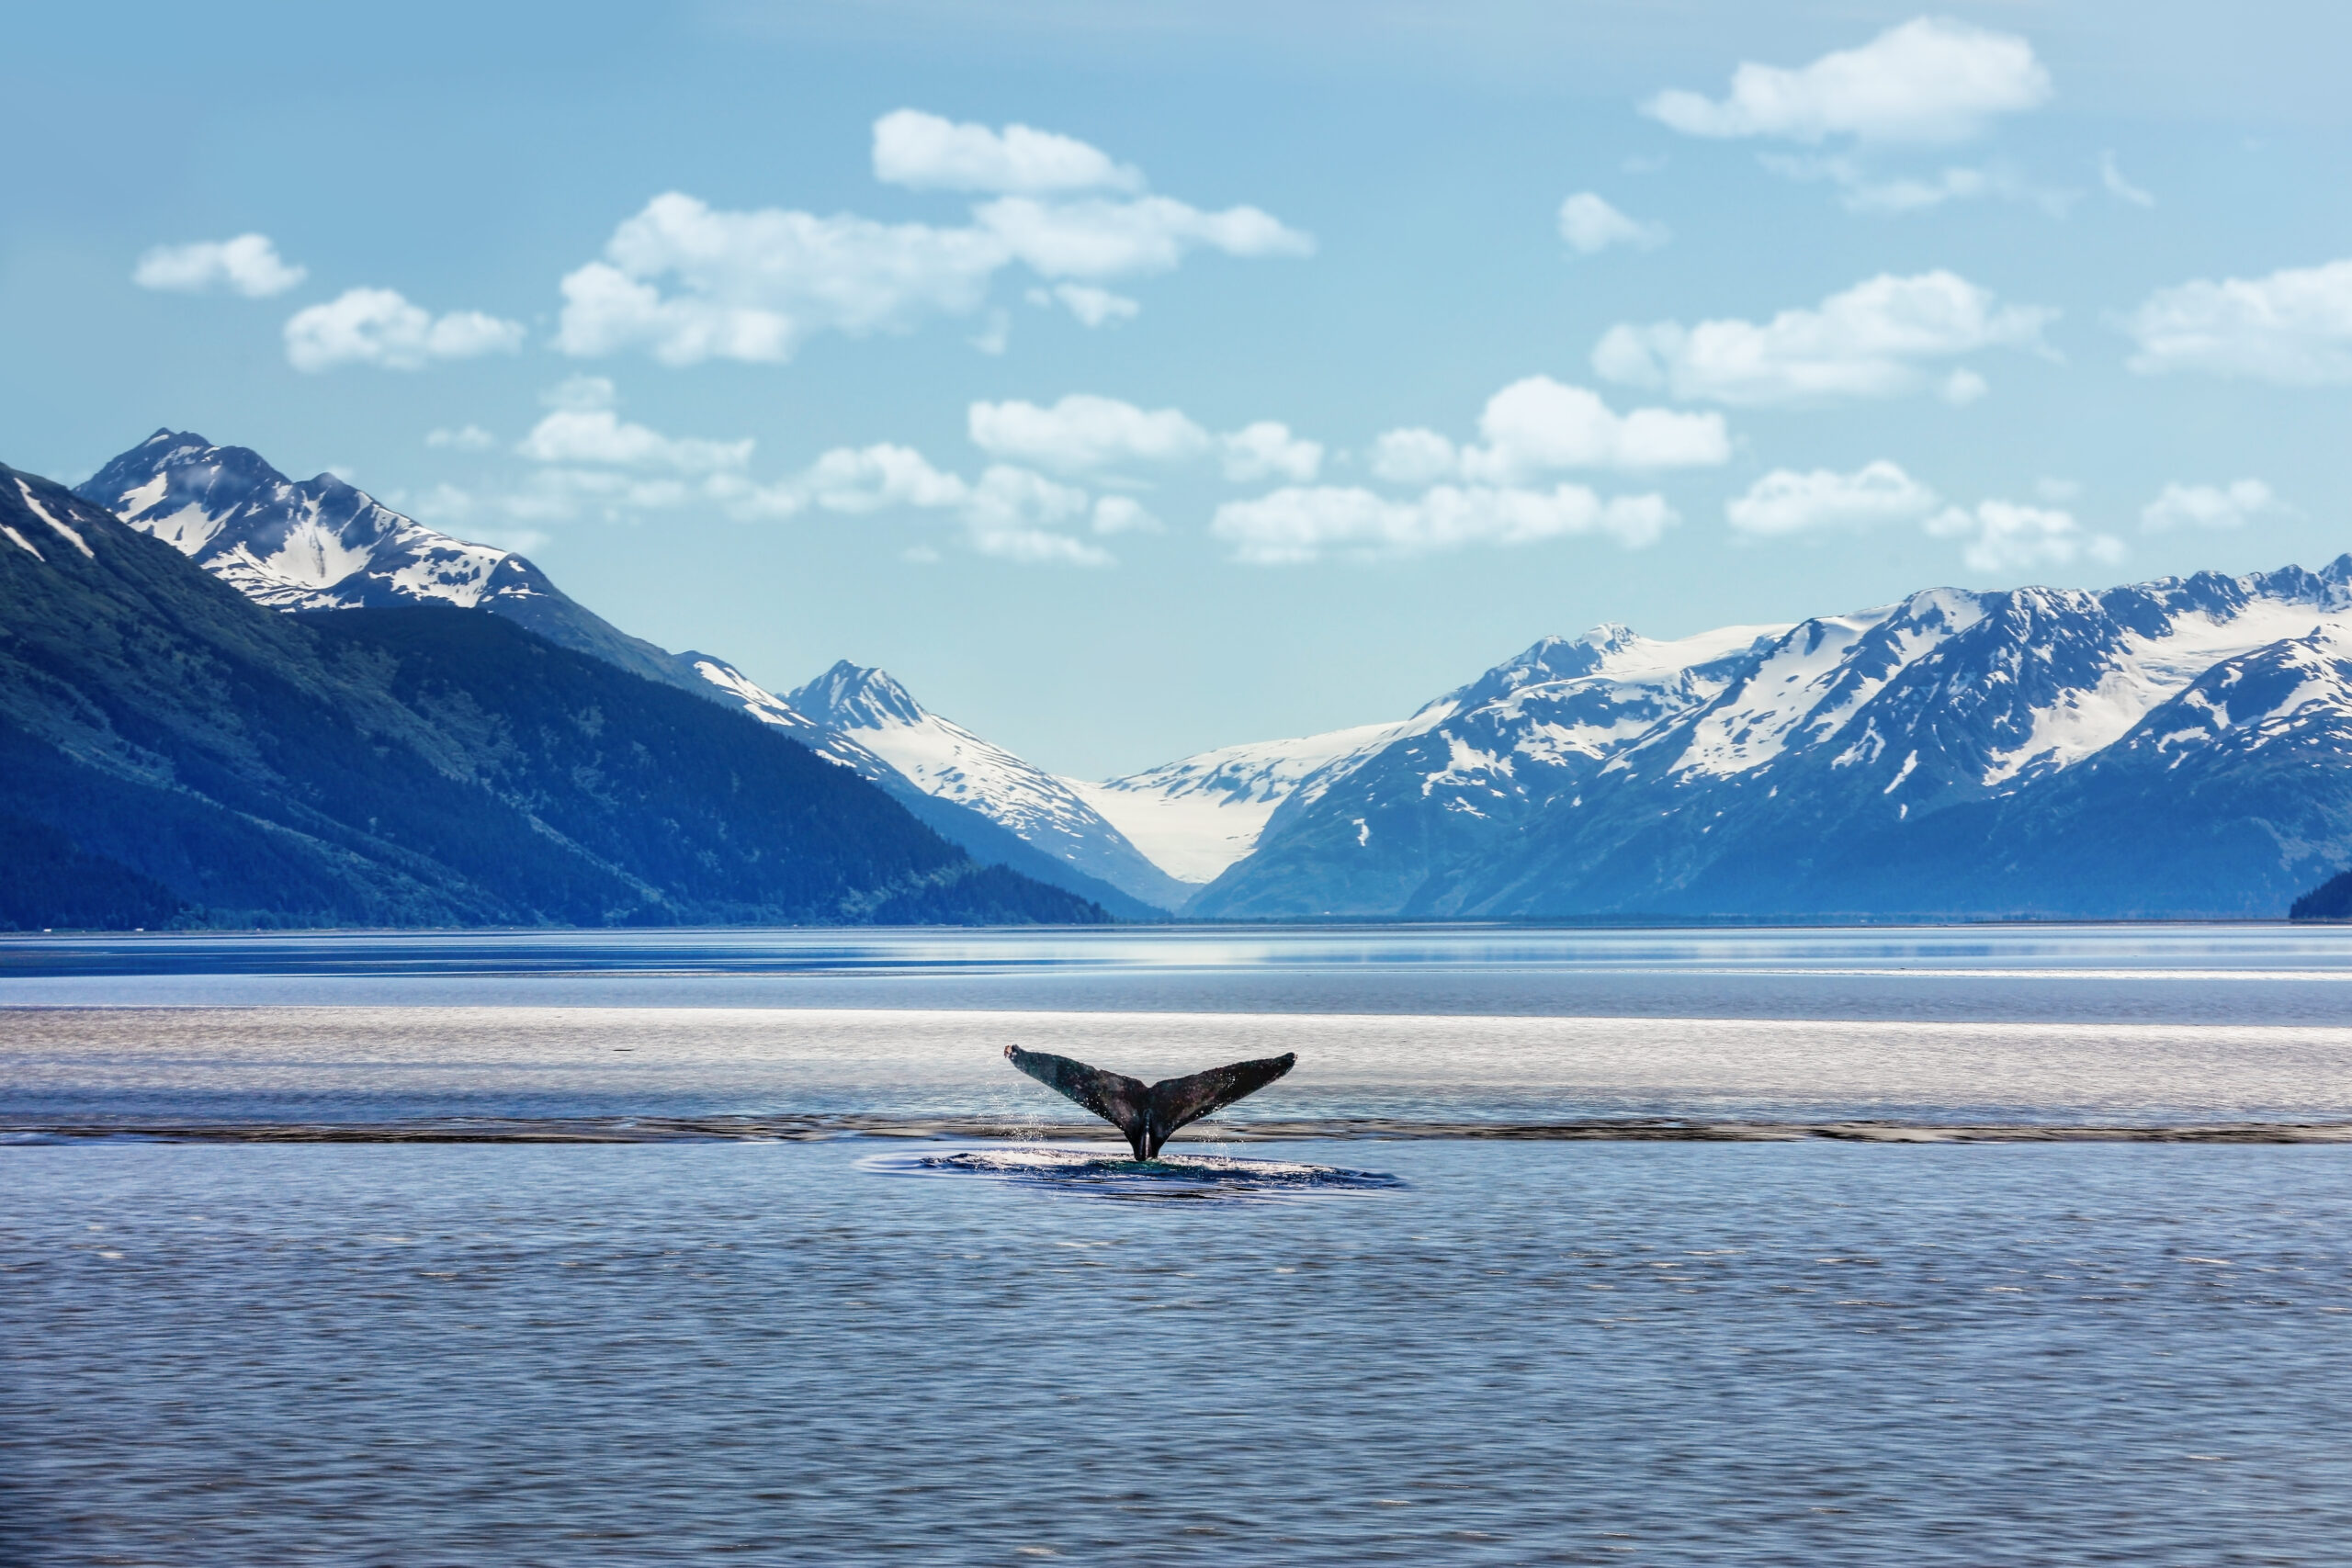 alaska scenery with whale tale in water